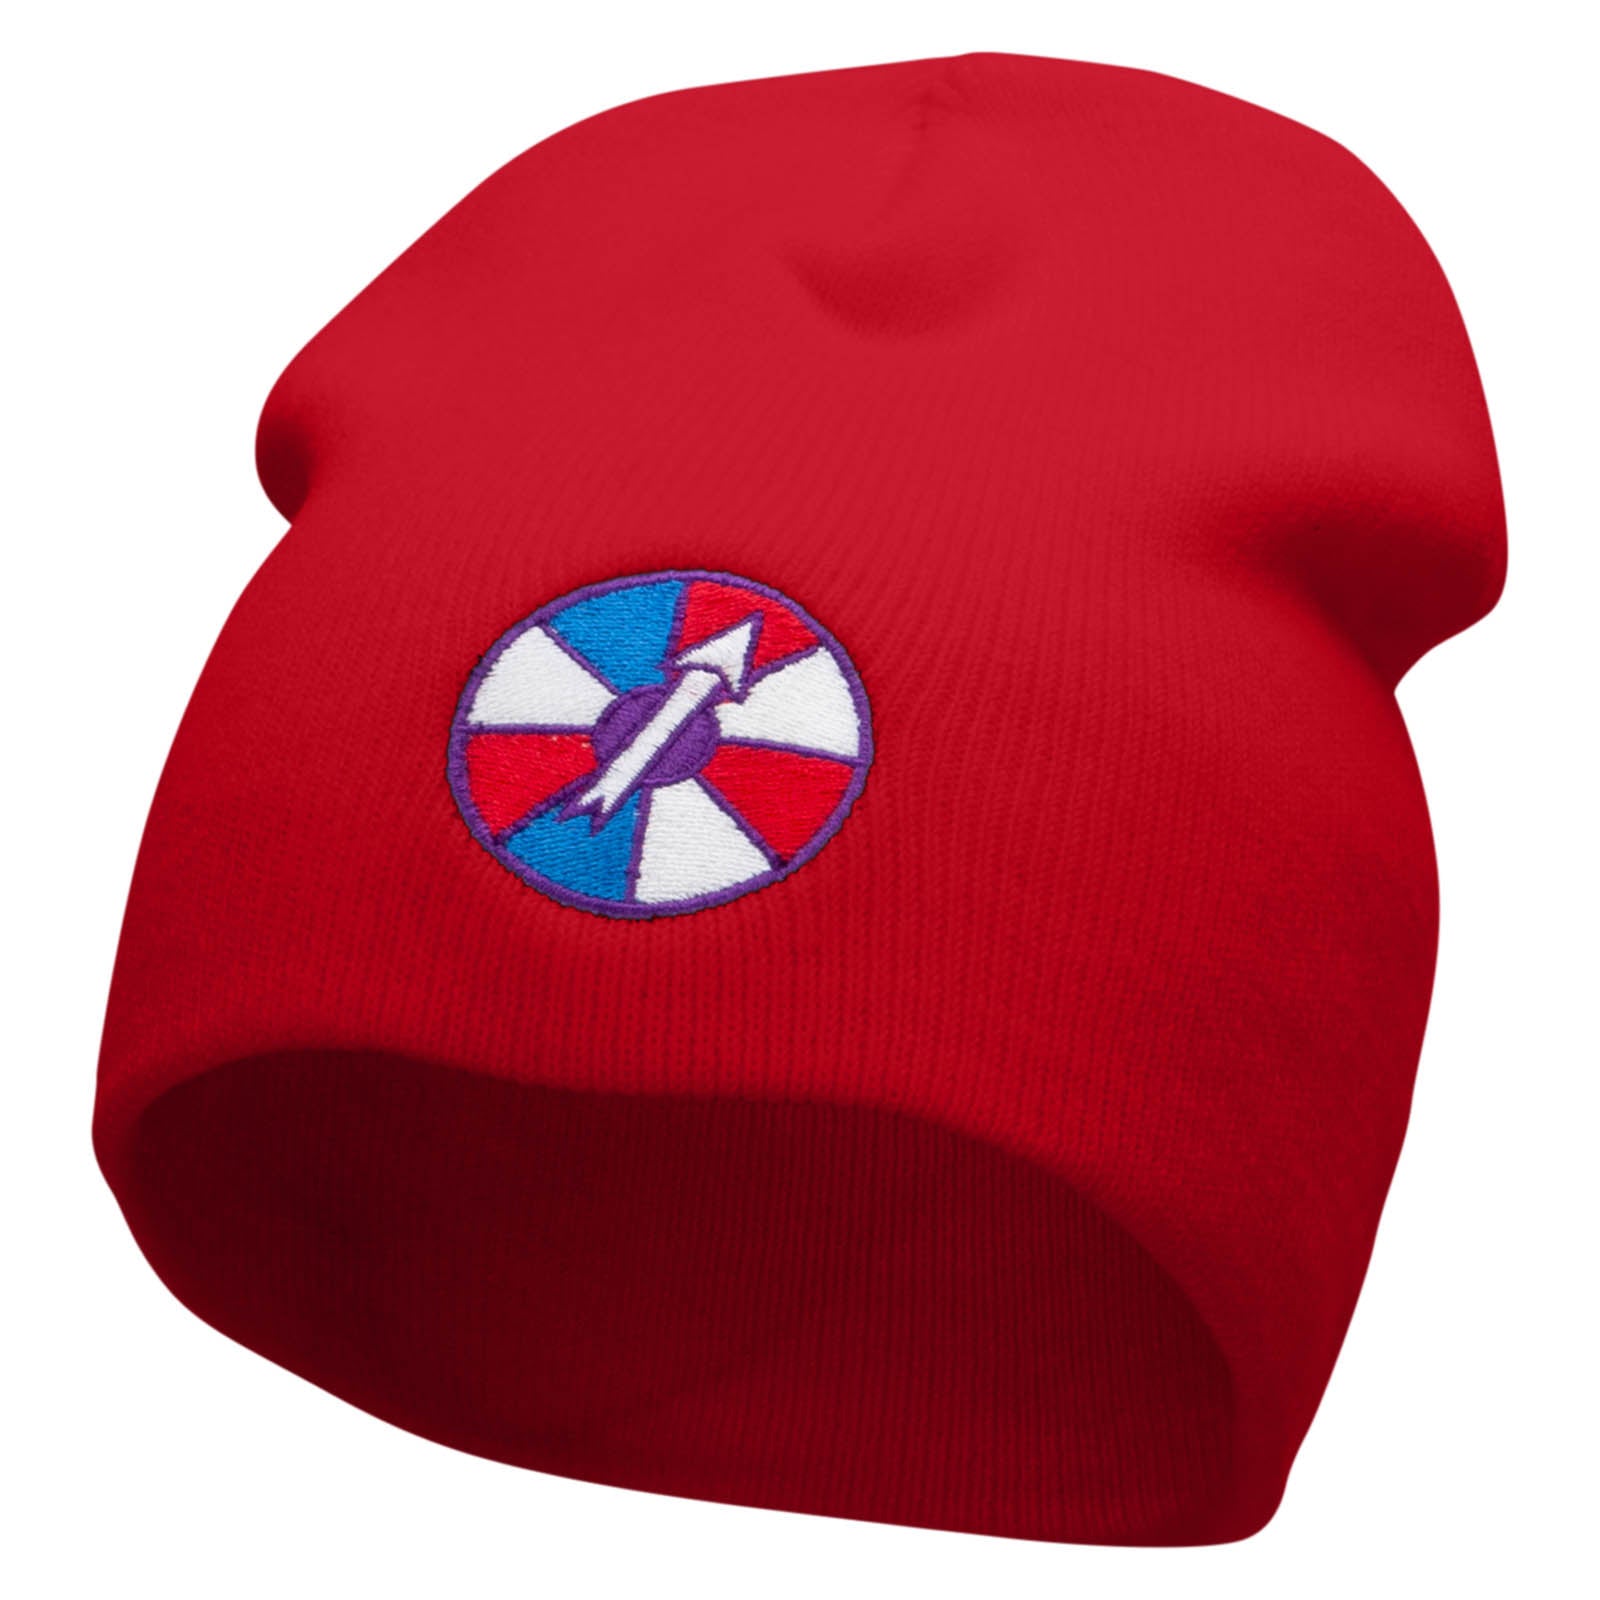 Chance Wheel Embroidered 8 Inch Short Beanie - Red OSFM